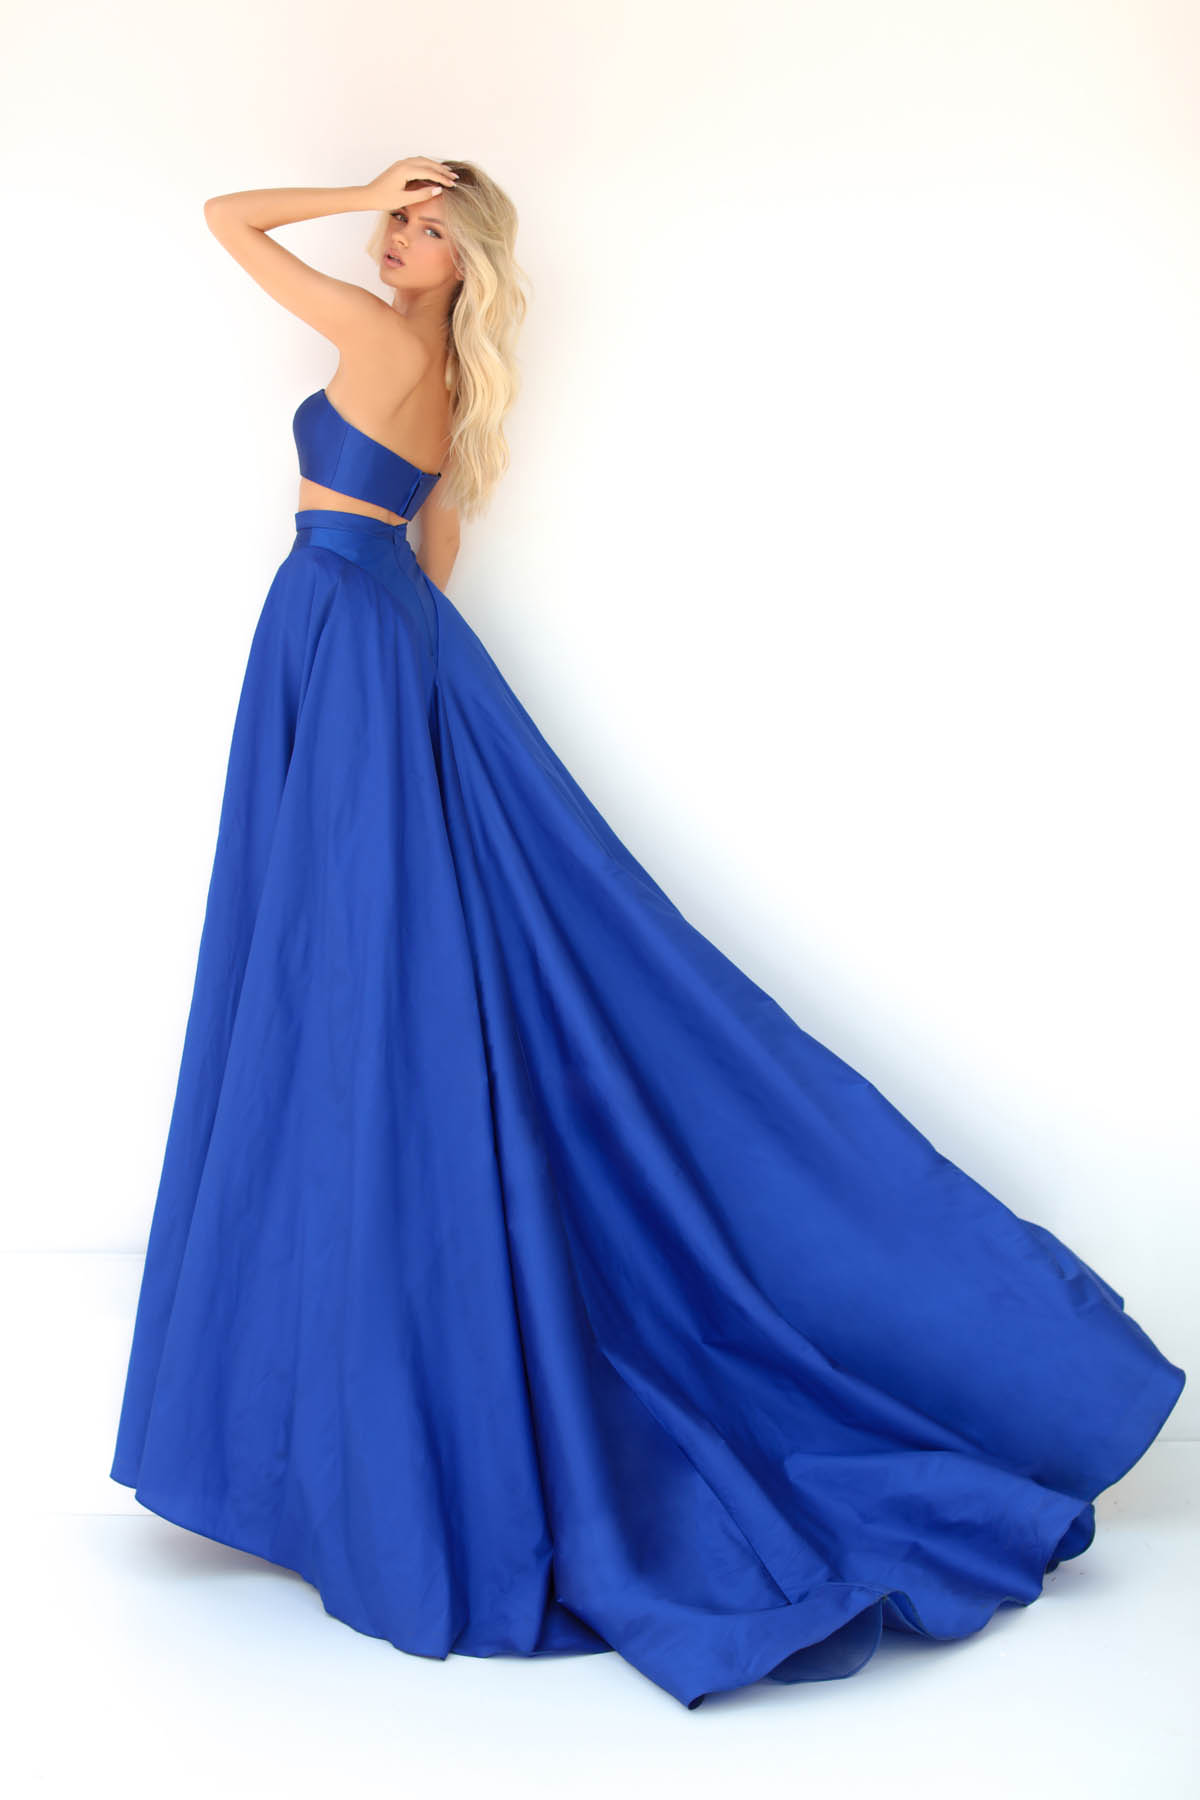 Picture of Royal Blue Dress